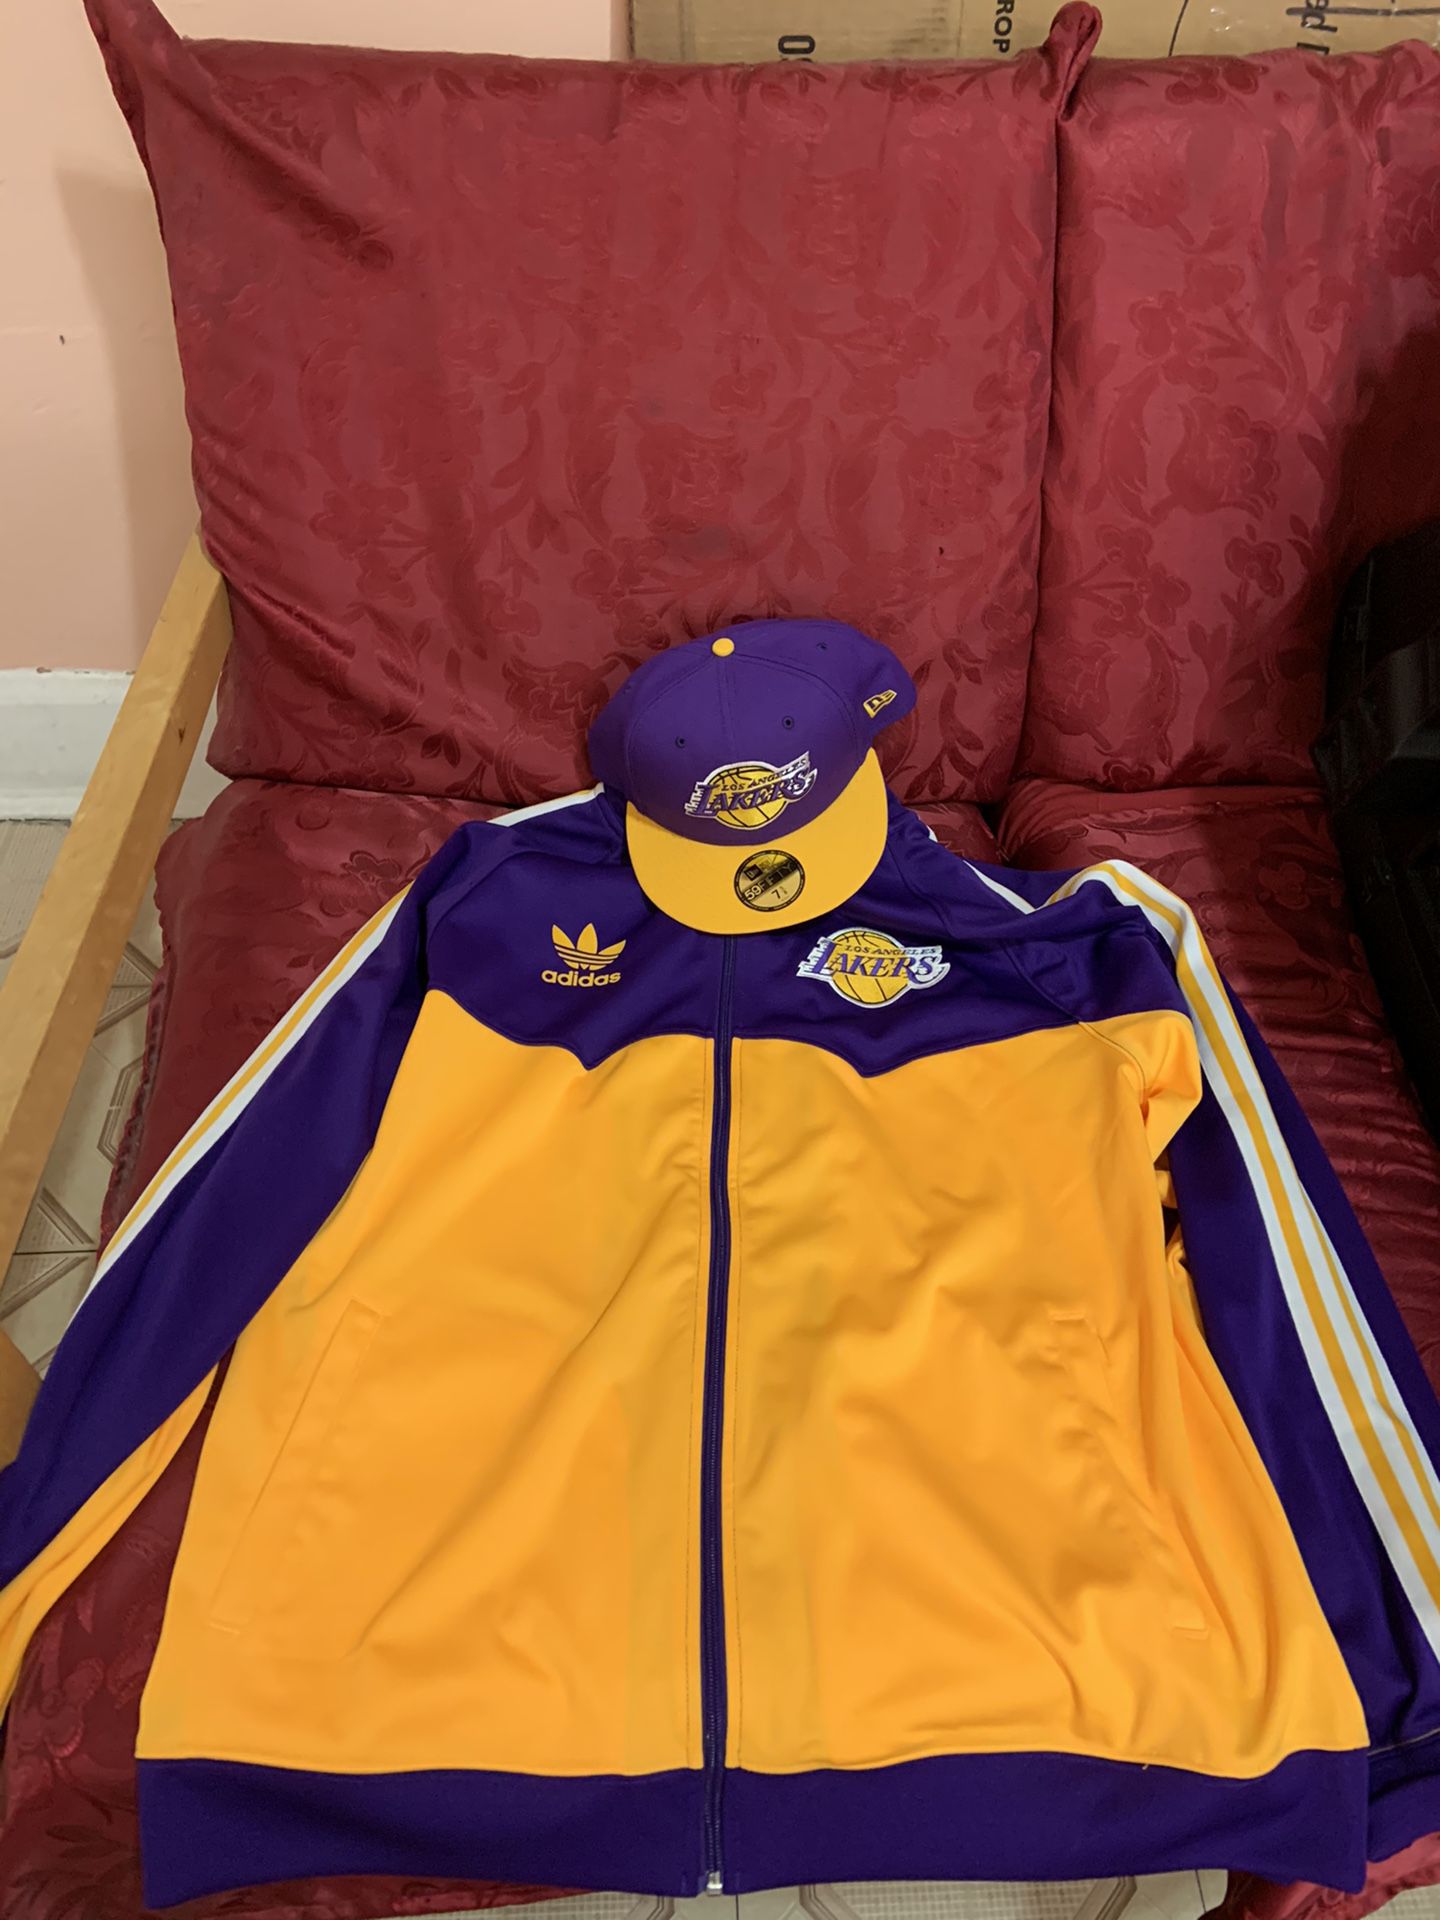 New Men's XL LA Lakers Adidas Track Jacket & New Era Fitted Hat 7 5/8 NBA  Los Angeles Outfit Lebron for Sale in The Bronx, NY - OfferUp